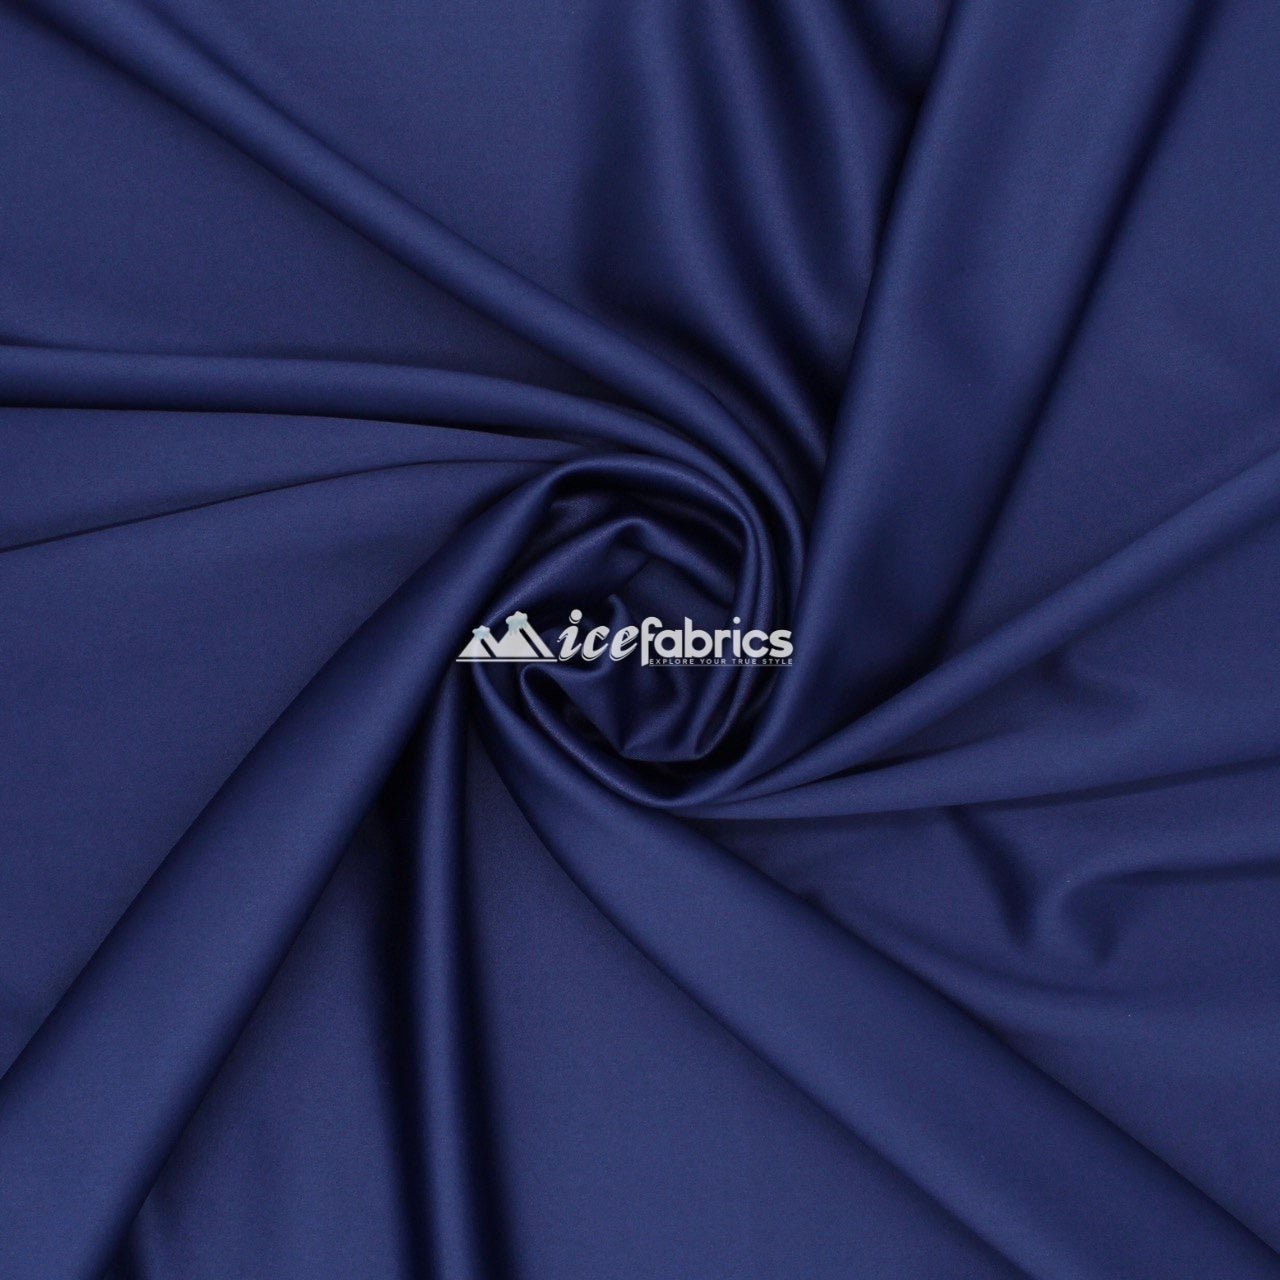 Armani Thick Solid Color Silky Stretch Satin Fabric Sold By The YardSatin FabricICE FABRICSICE FABRICSSilverArmani Thick Solid Color Silky Stretch Satin Fabric Sold By The Yard ICE FABRICS Navy Blue